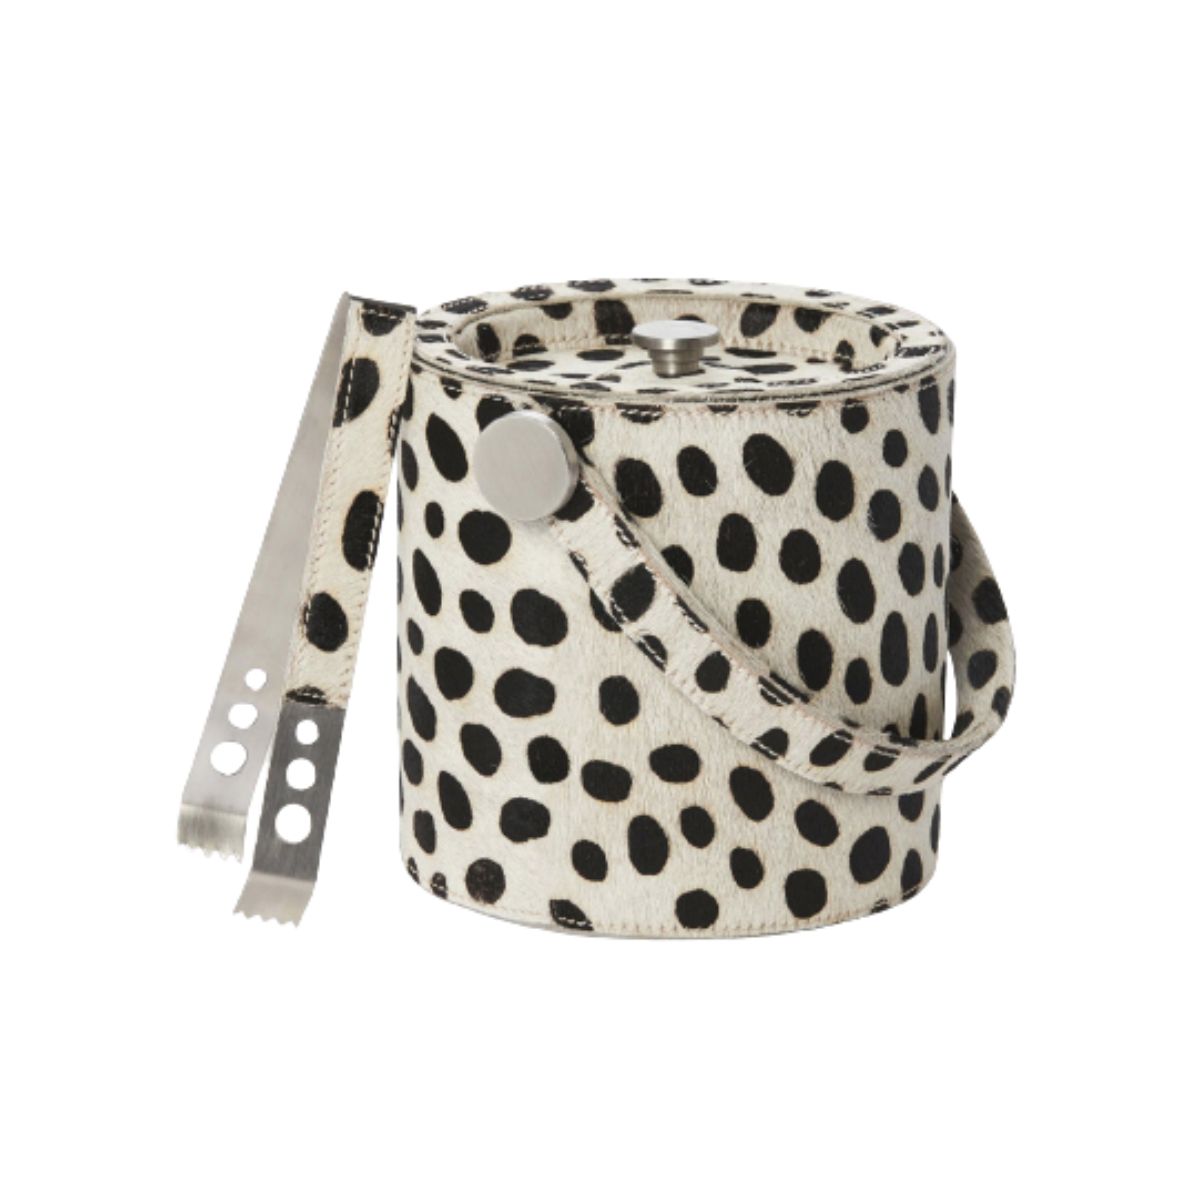 Dalmatian Print Hair on Hide Ice Bucket with Tong